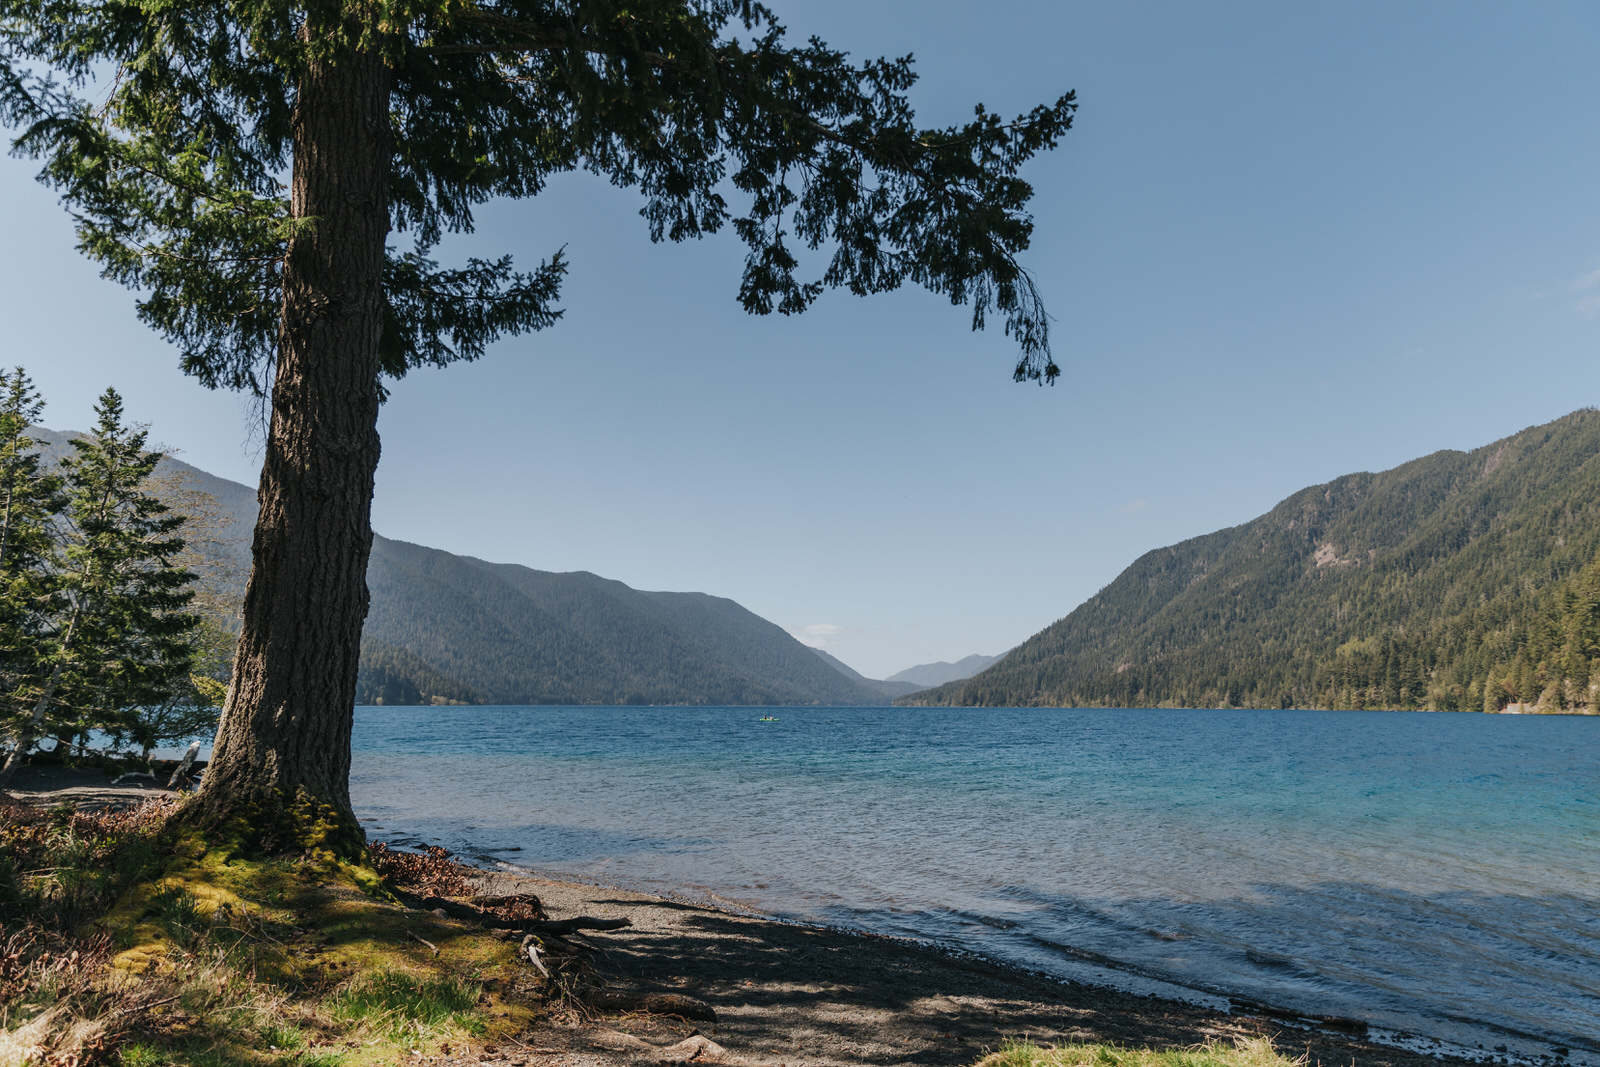 This Lake Crescent View makes a great Olympic National Park Elopement location with its blue waters, forested beach, and distant forested hills.